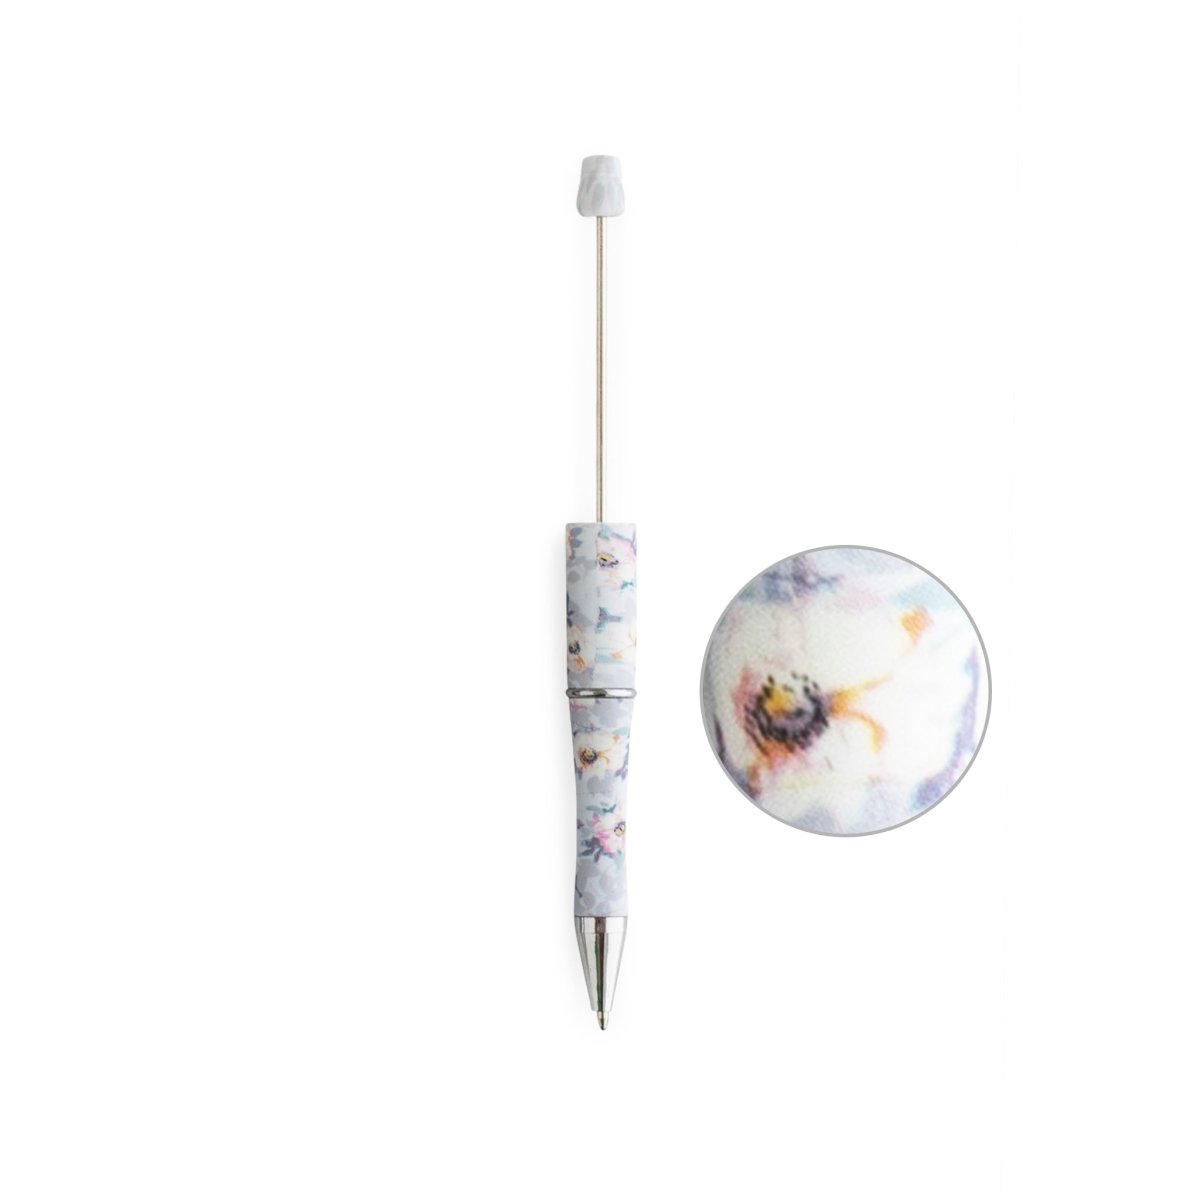 Beadables Pens - Plastic - Printed Soft Floral from Cara & Co Craft Supply